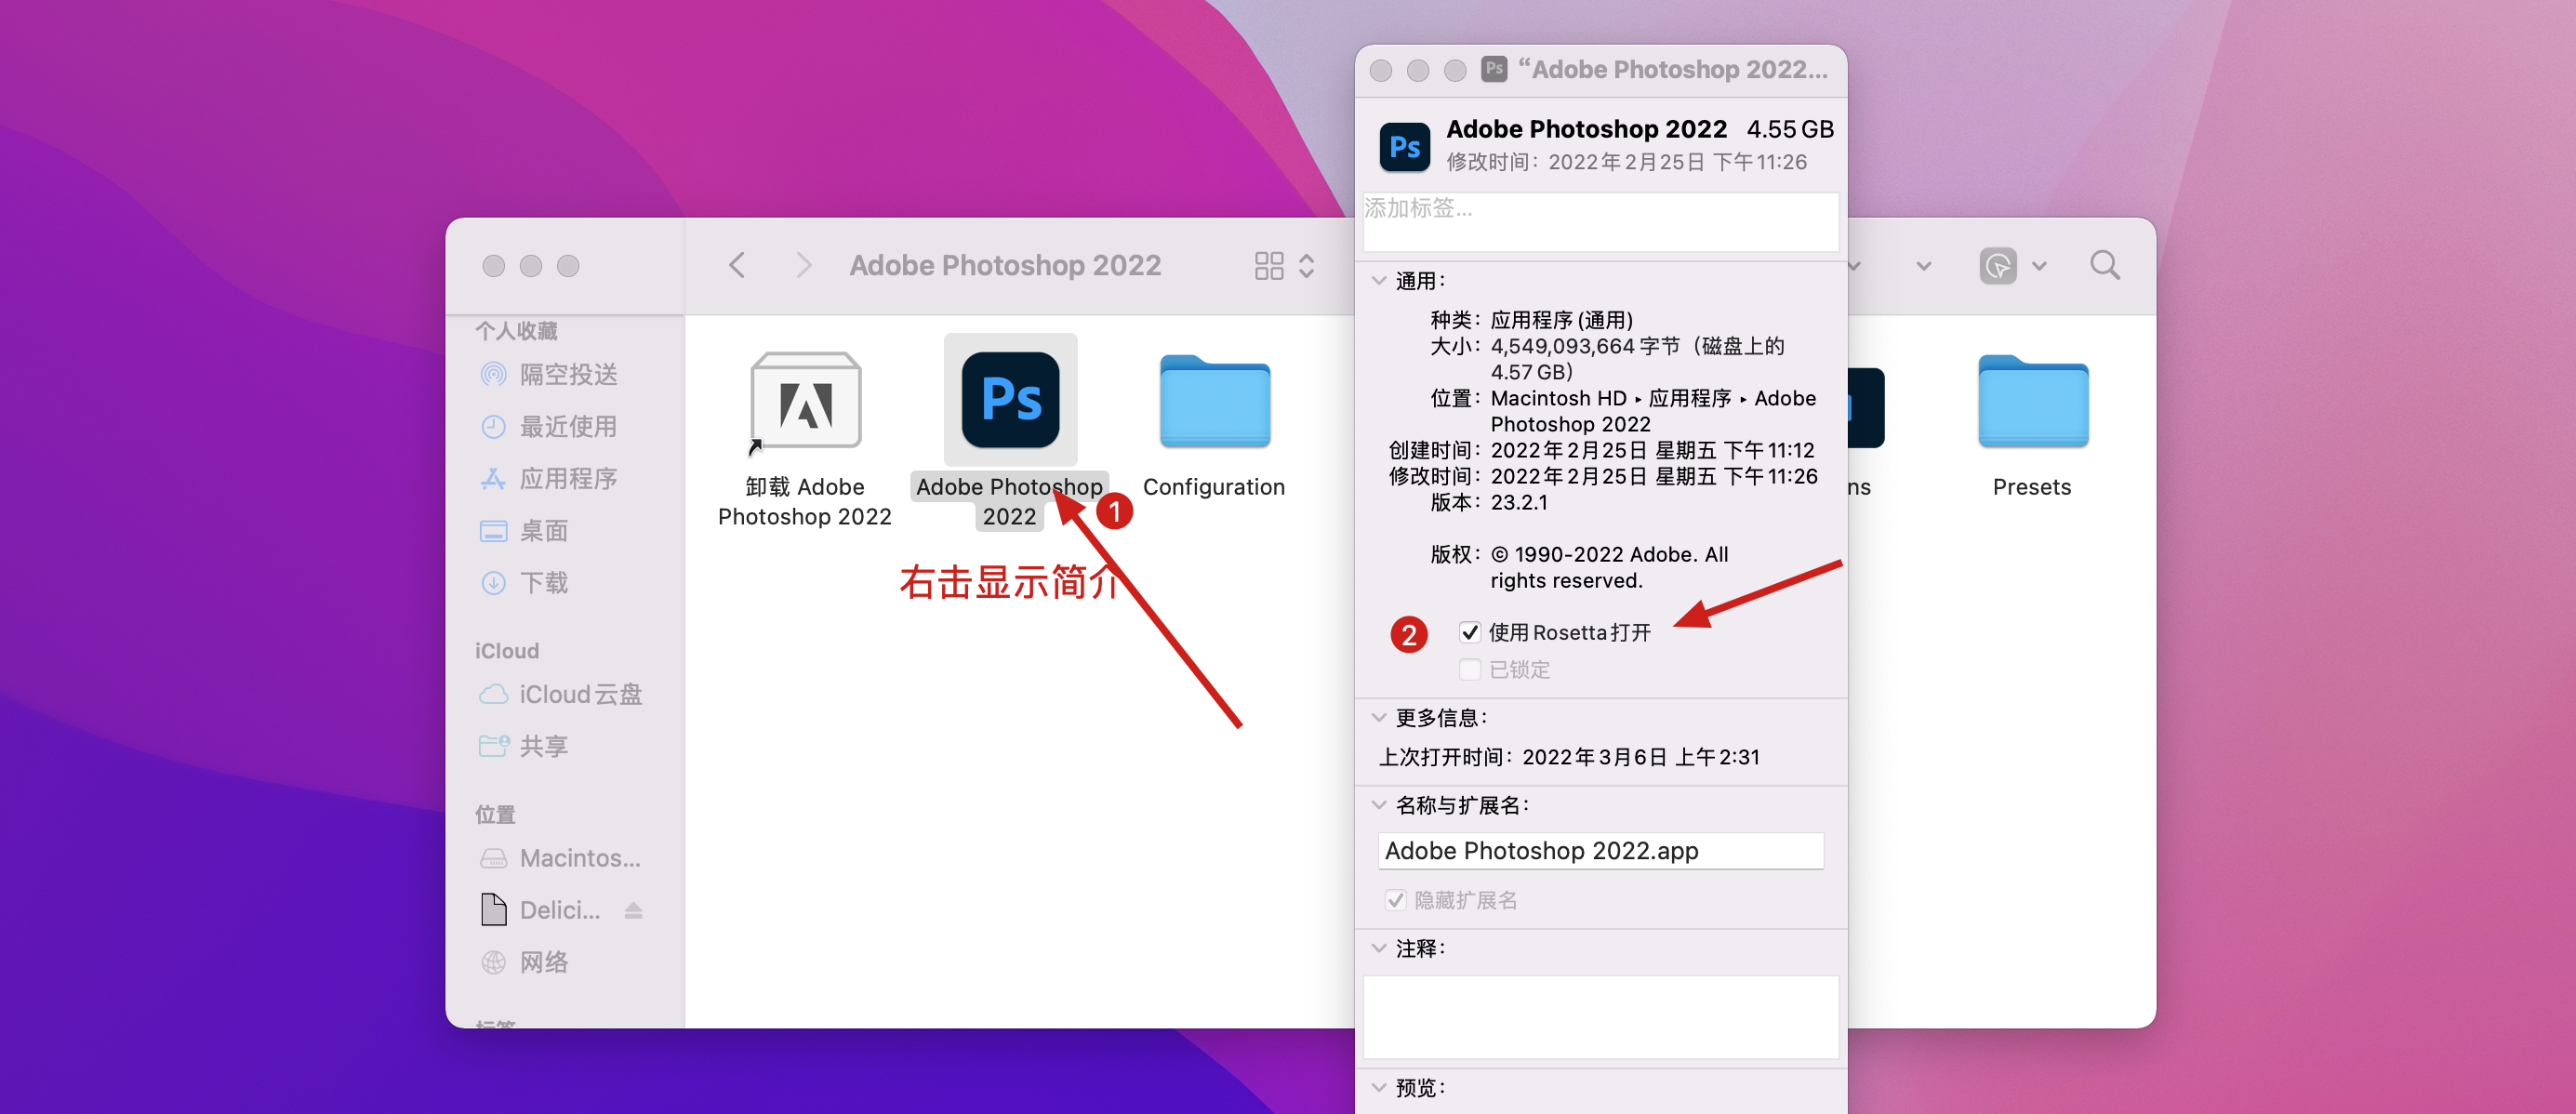 DR5白金版 for mac PS一键磨皮插件Delicious Retouch 支持ps2022 v5.0汉化版